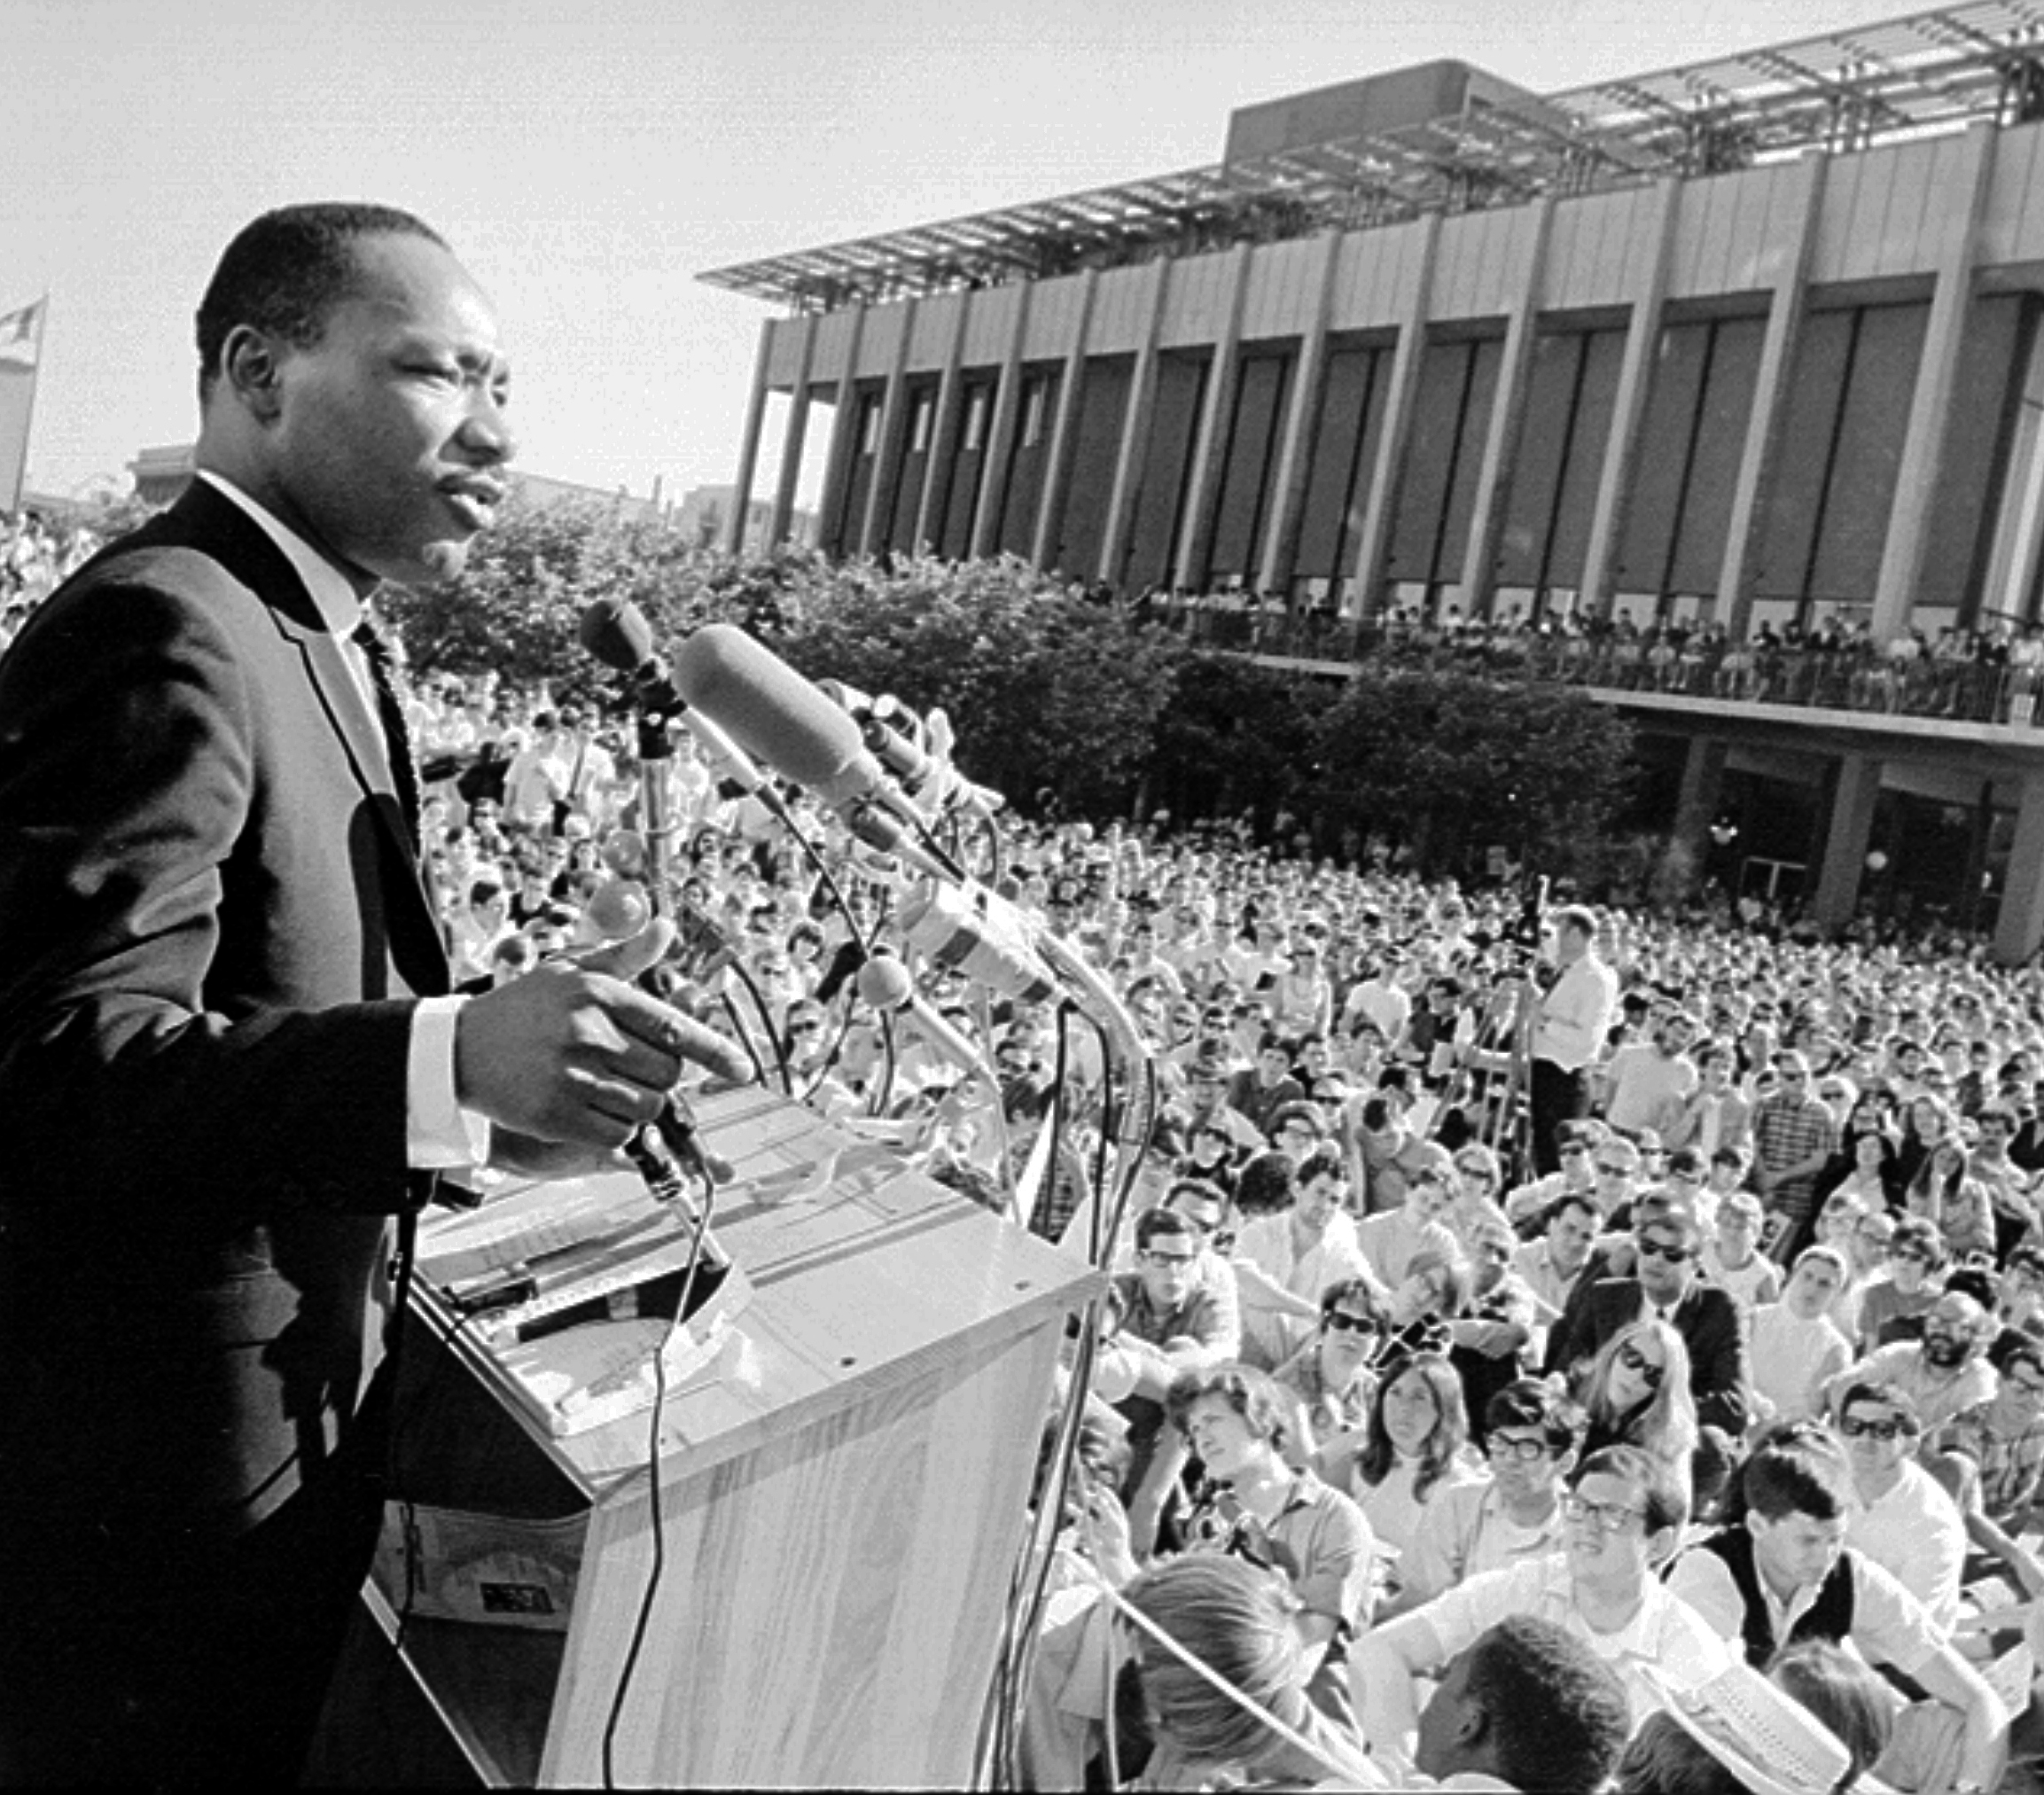 Martin Luther King, Jr. speaks at a podium before a large crowd, outdoors, in a black and white photo.